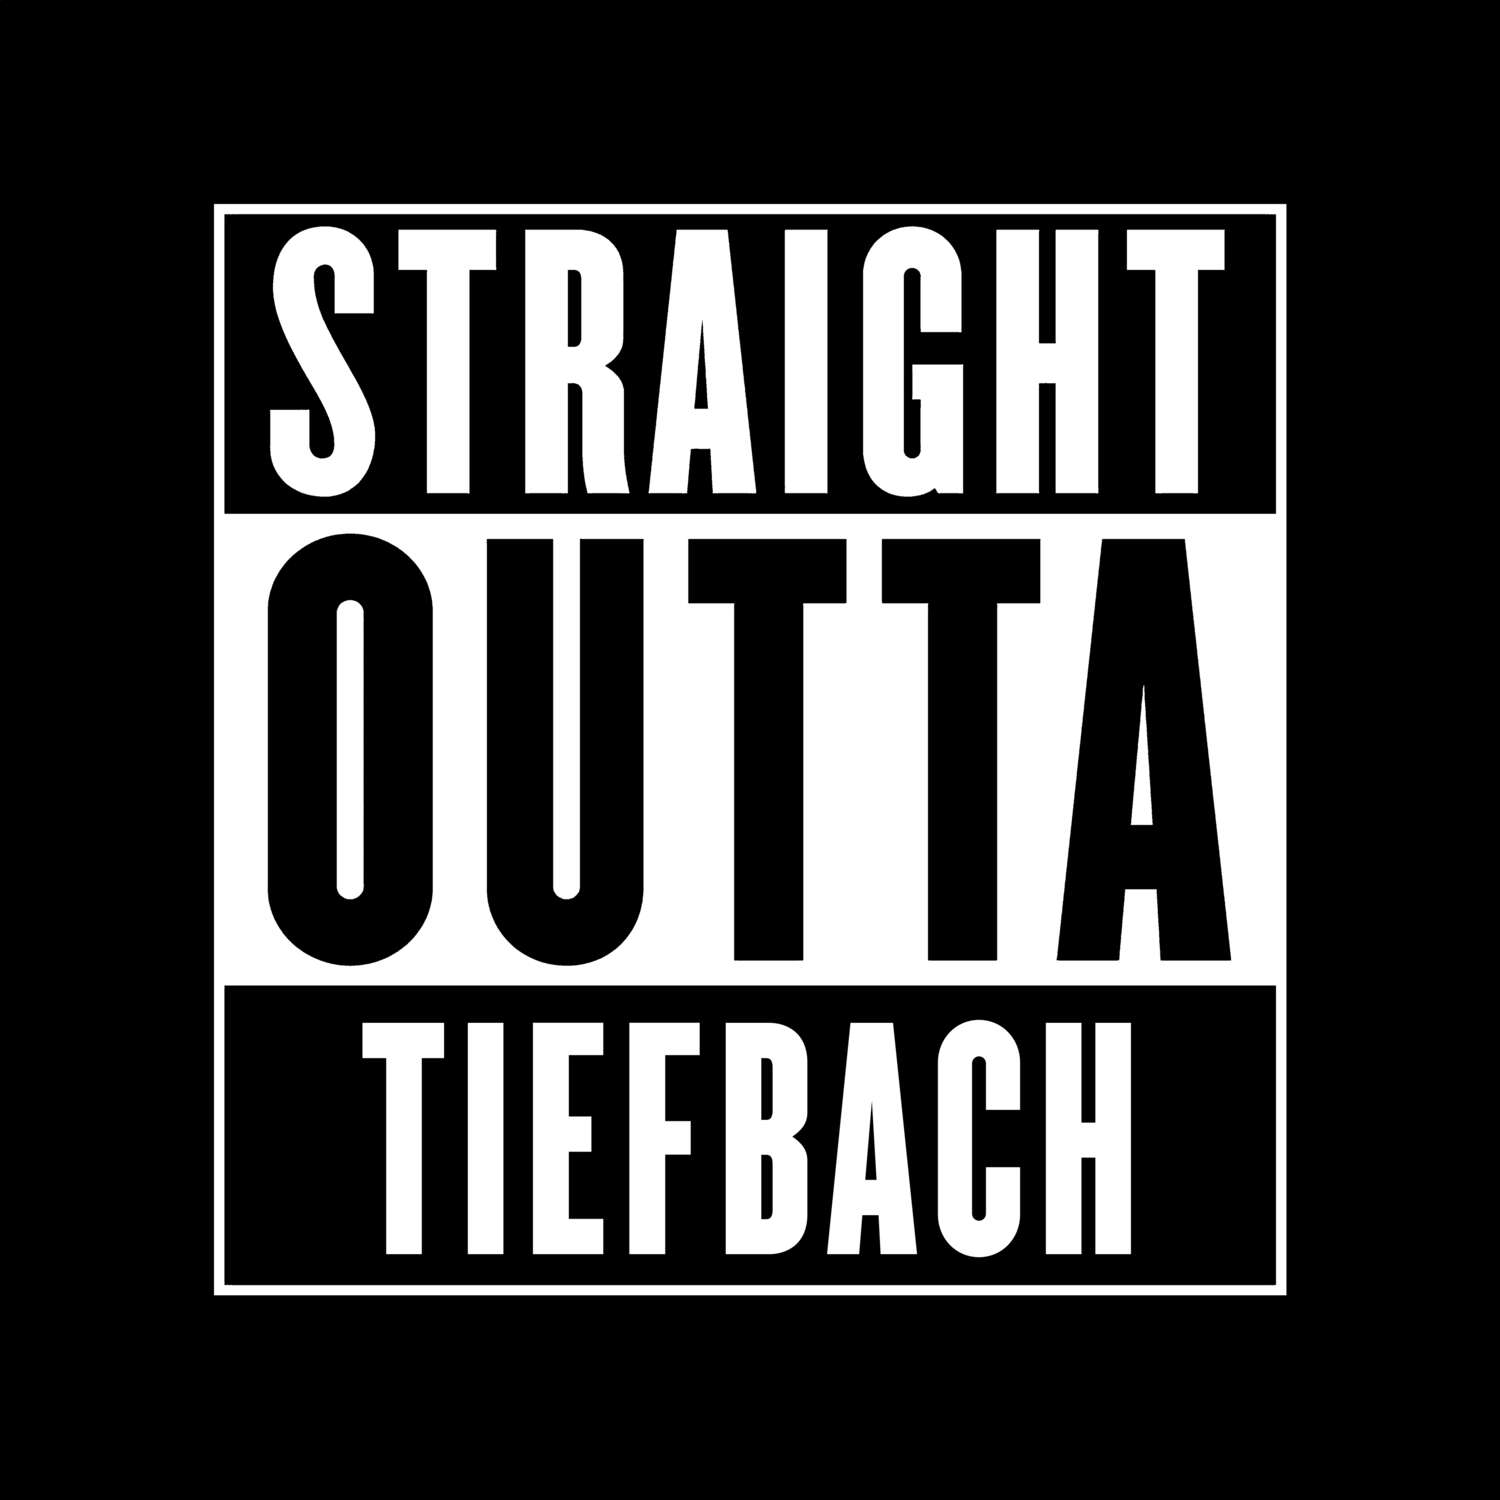 Tiefbach T-Shirt »Straight Outta«